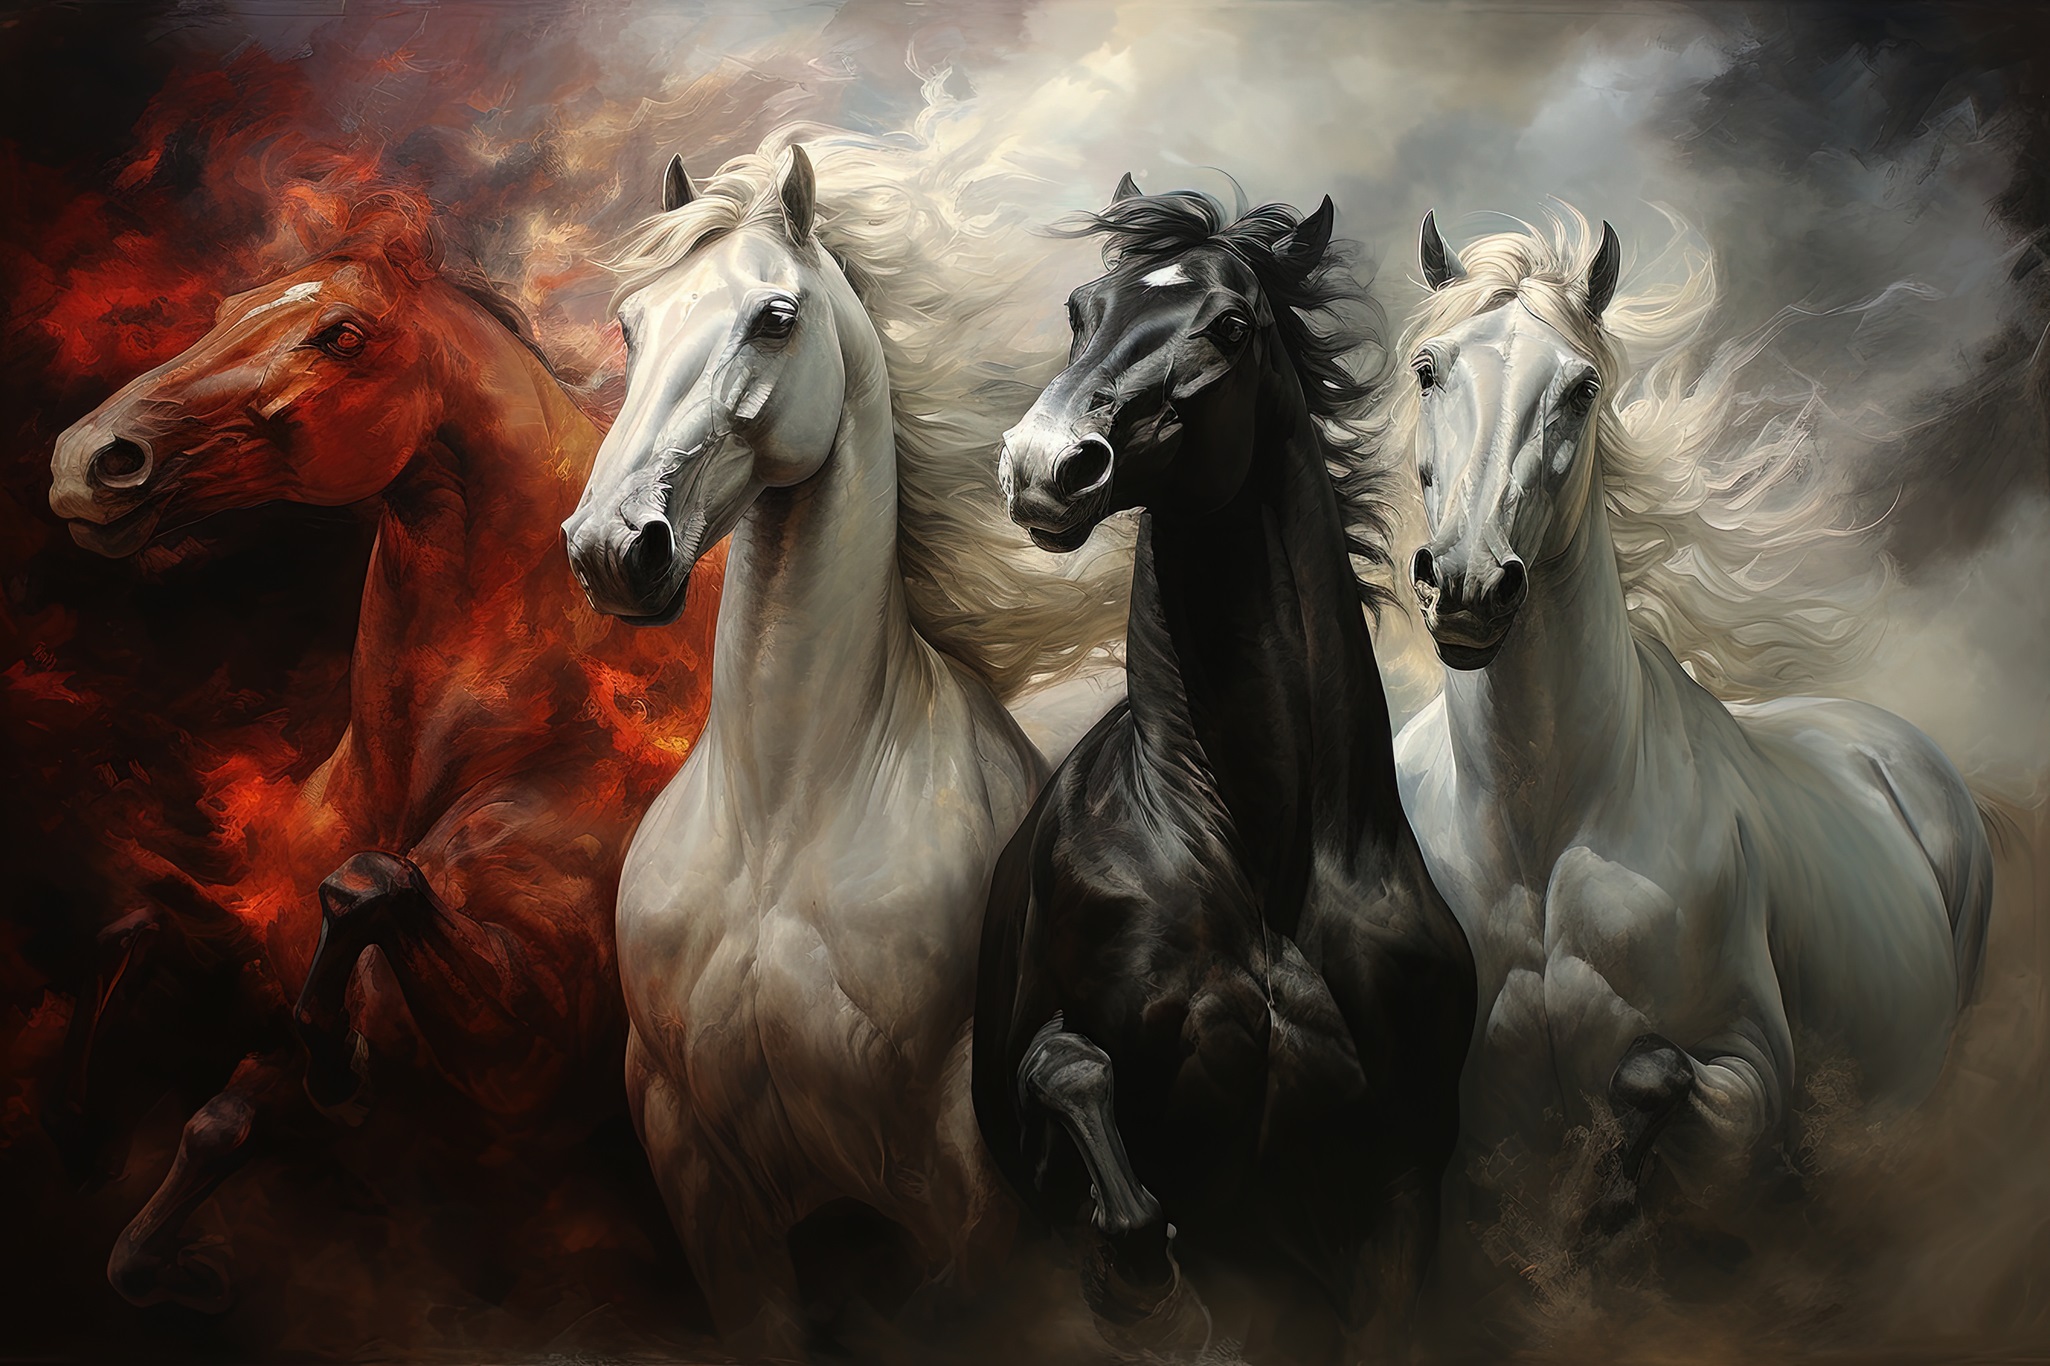 The Great Reset Part 1: The Four Horsemen of the Apocalypse